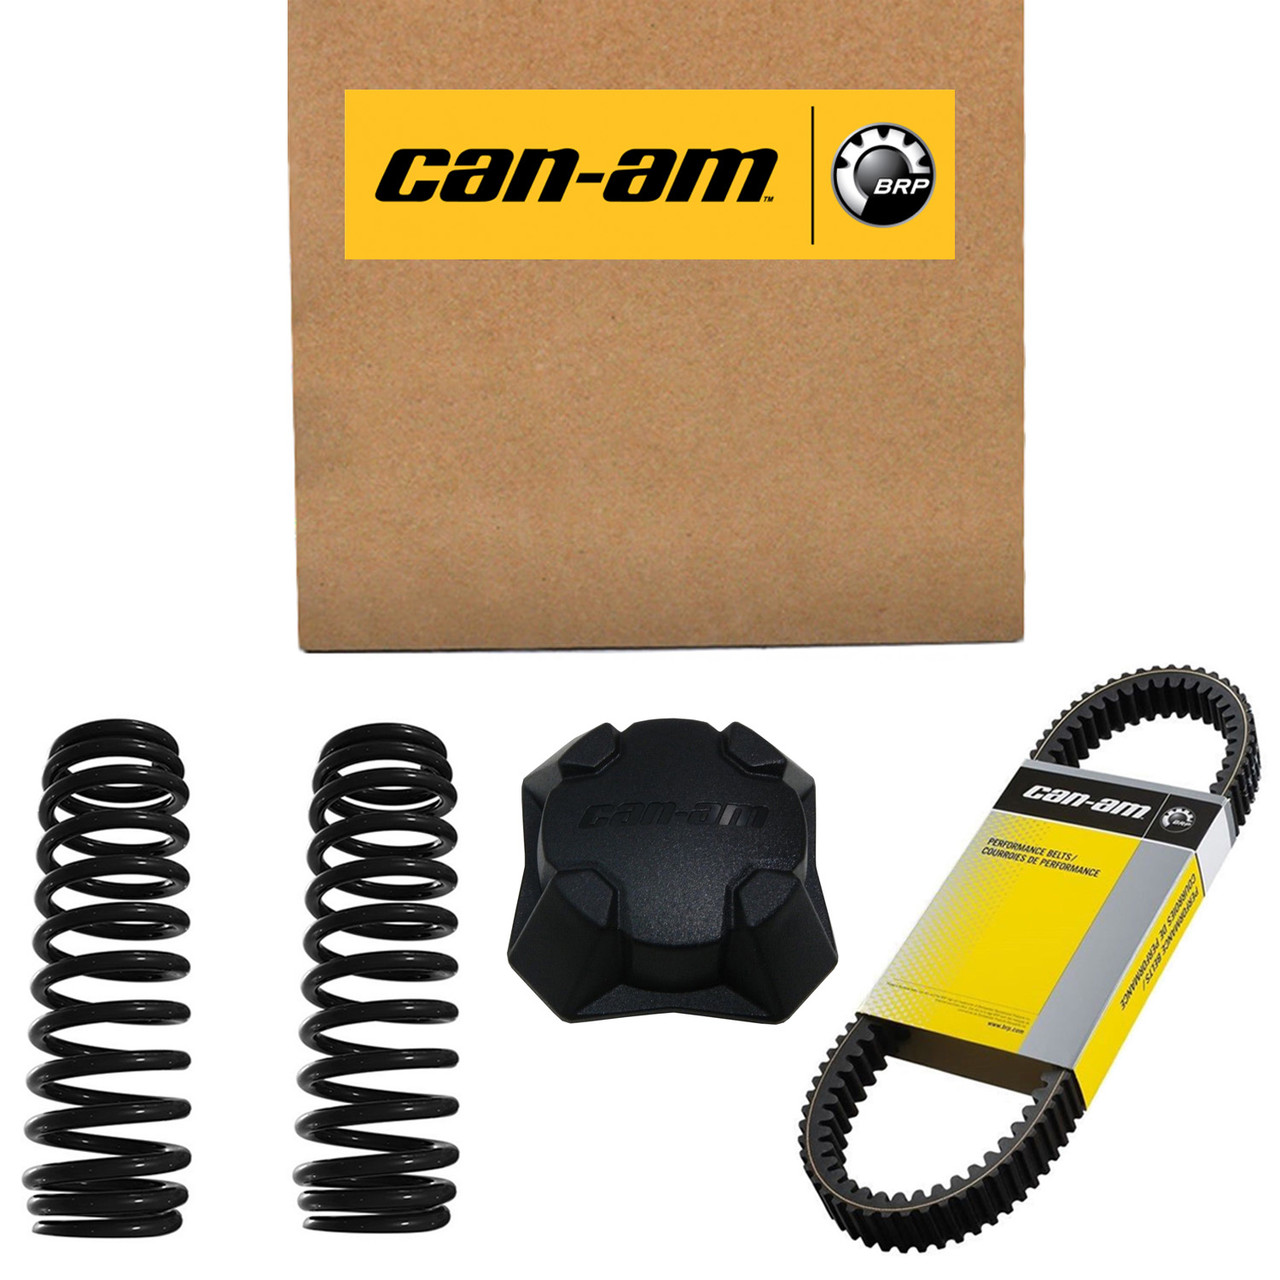 Can-Am New OEM 12V Wiring, 710003108